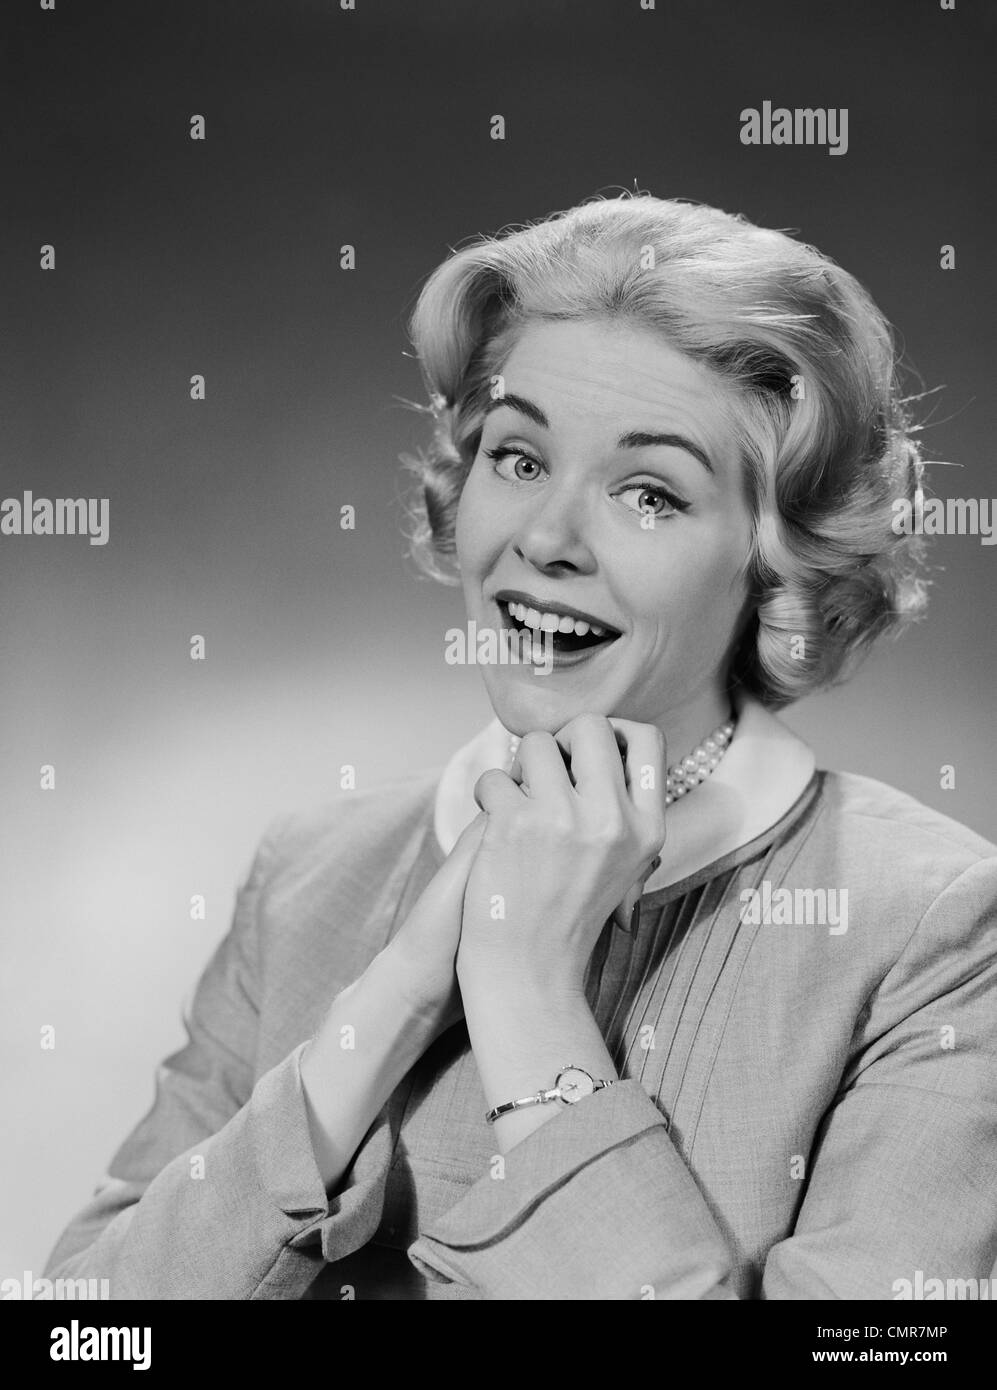 1950s 1960s WOMAN CLASPED HAND BY CHIN WITH WISHFUL HOPING HAPPY JOYFUL FACIAL EXPRESSION Stock Photo